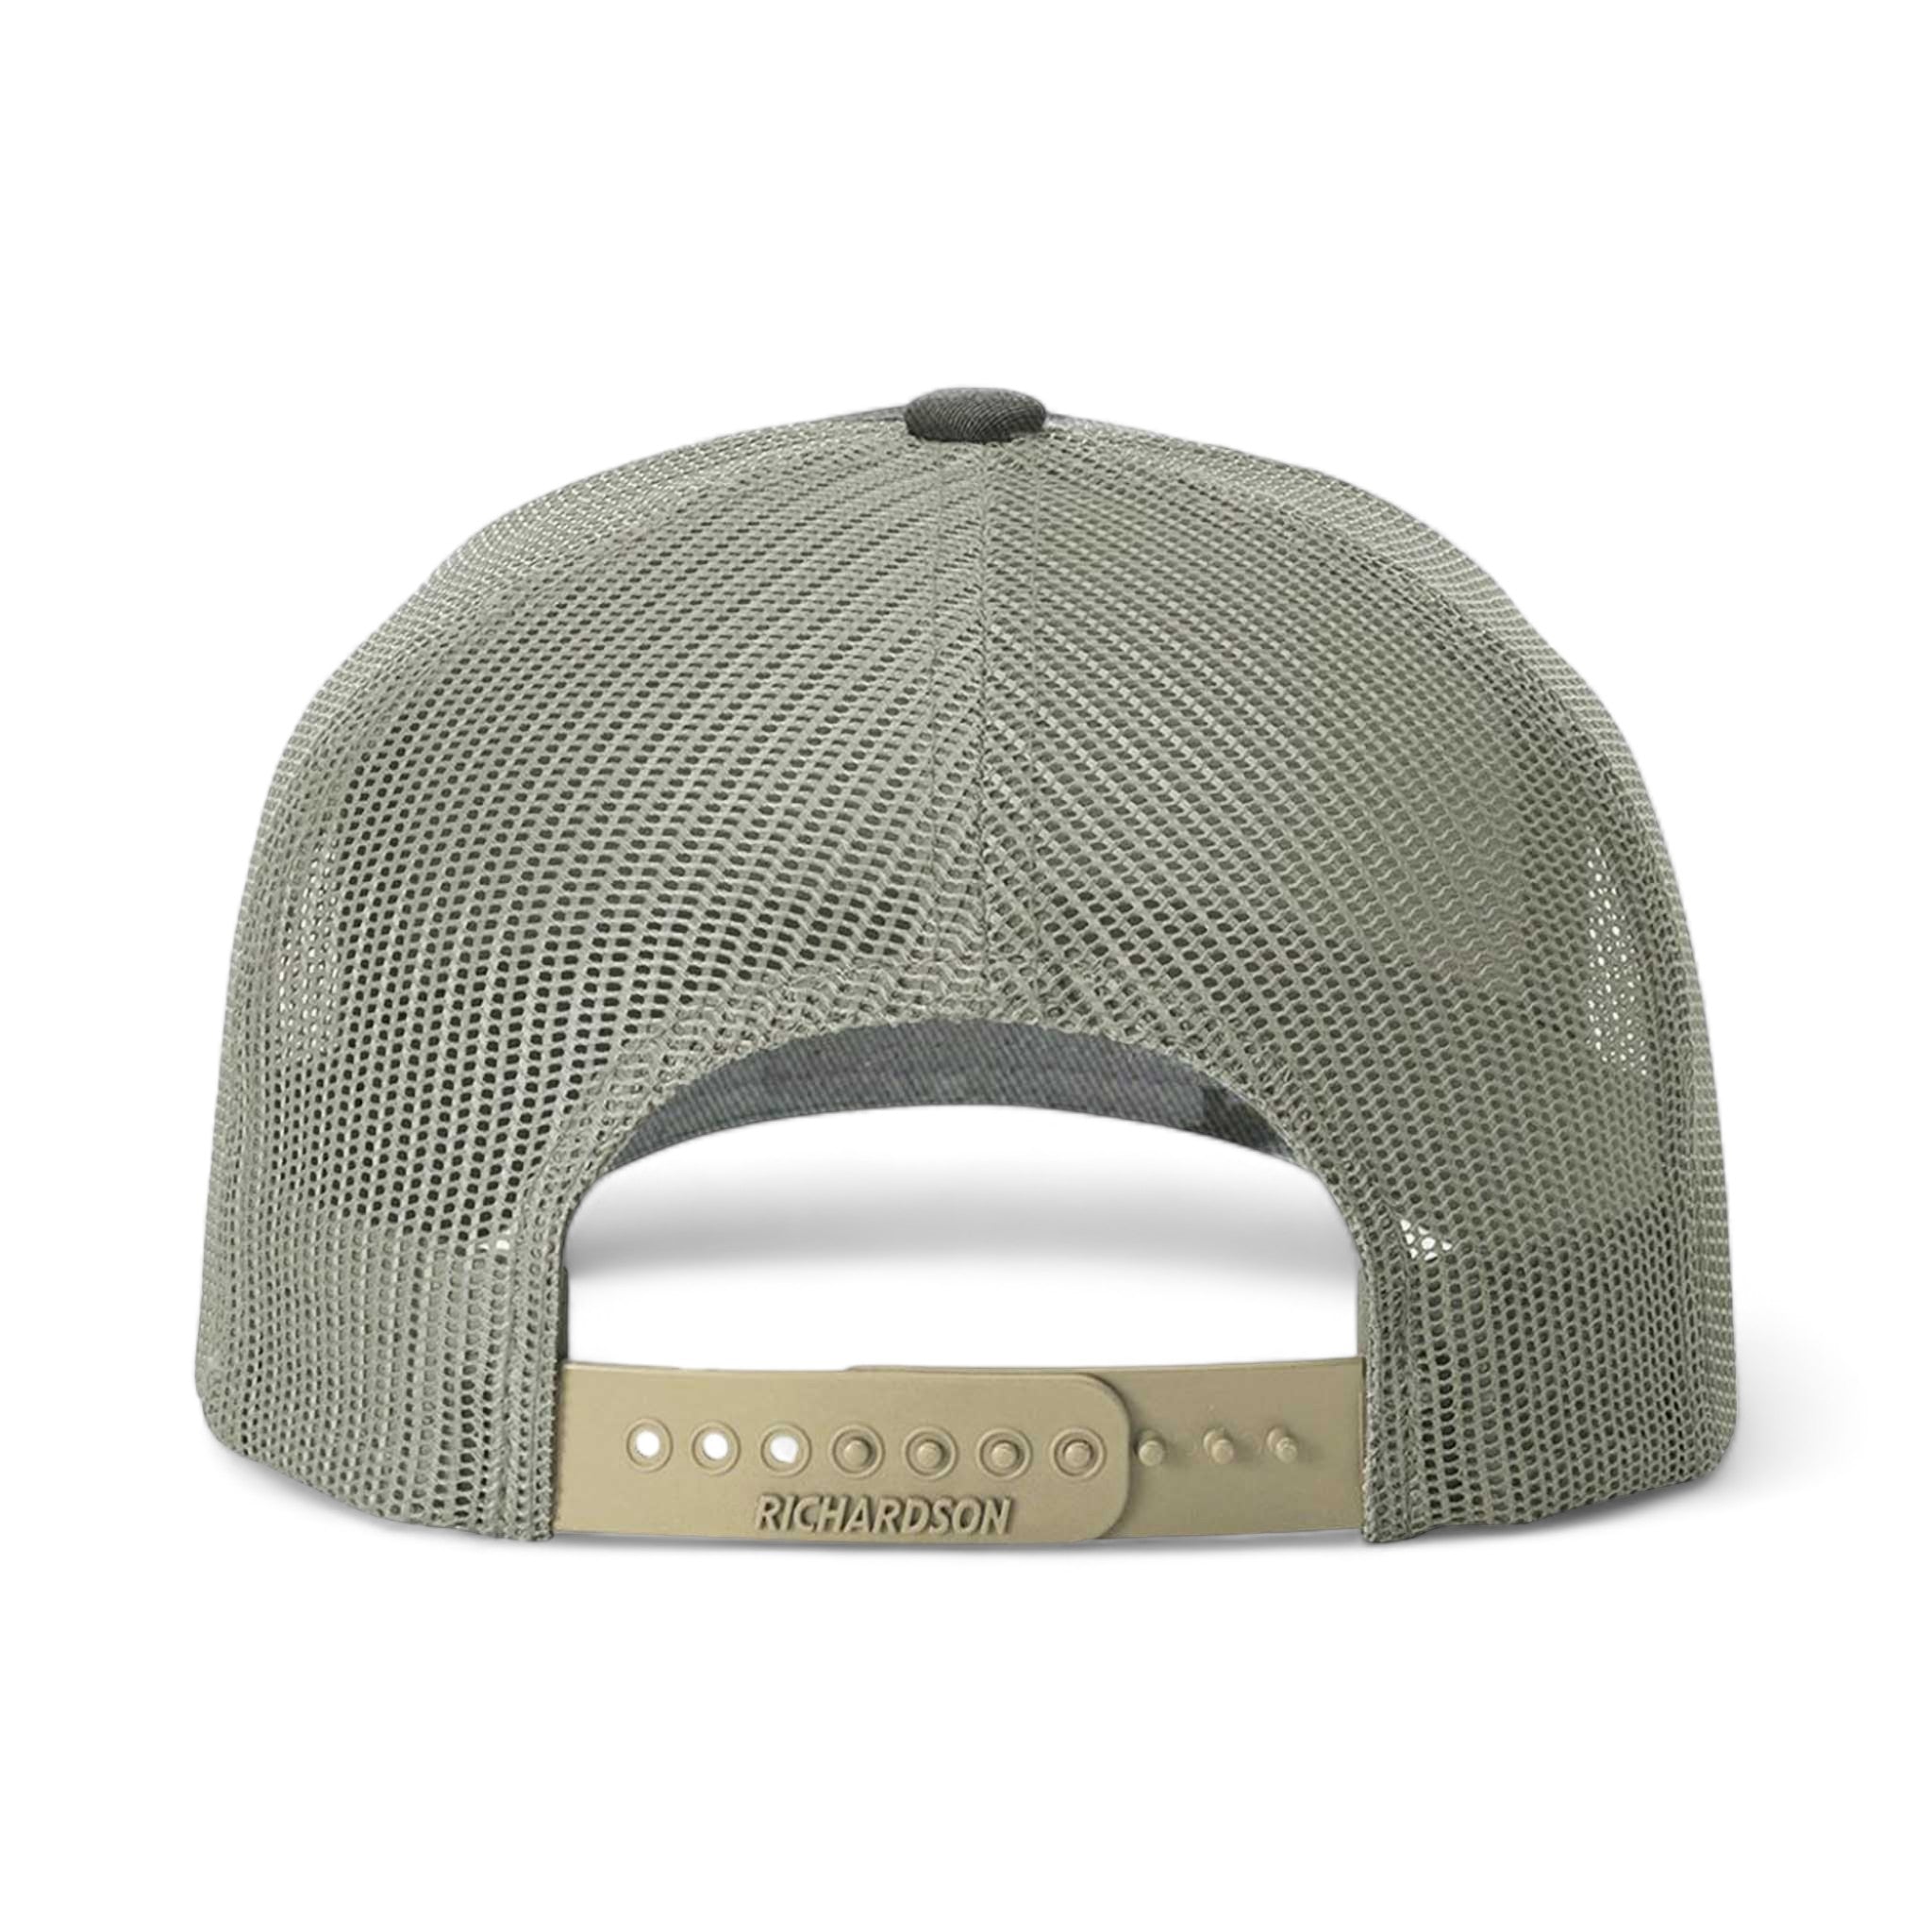 Back view of Richardson 112PFP custom hat in digital camo and light green